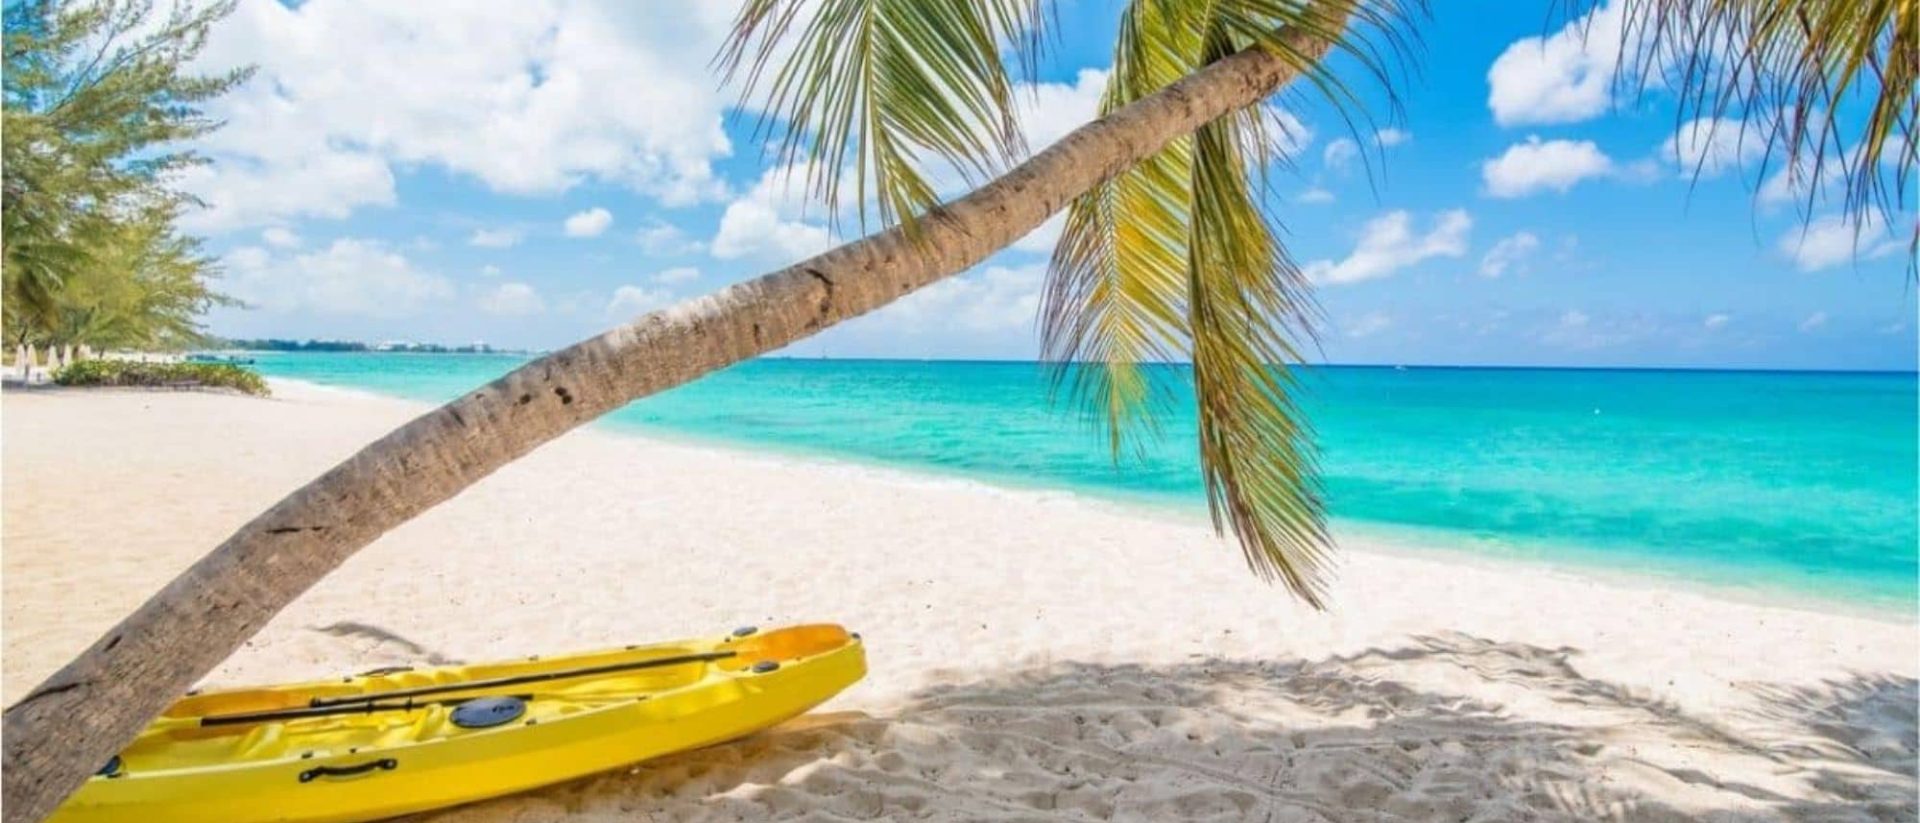 A yellow kayak sits on the sand next to a palm tree.